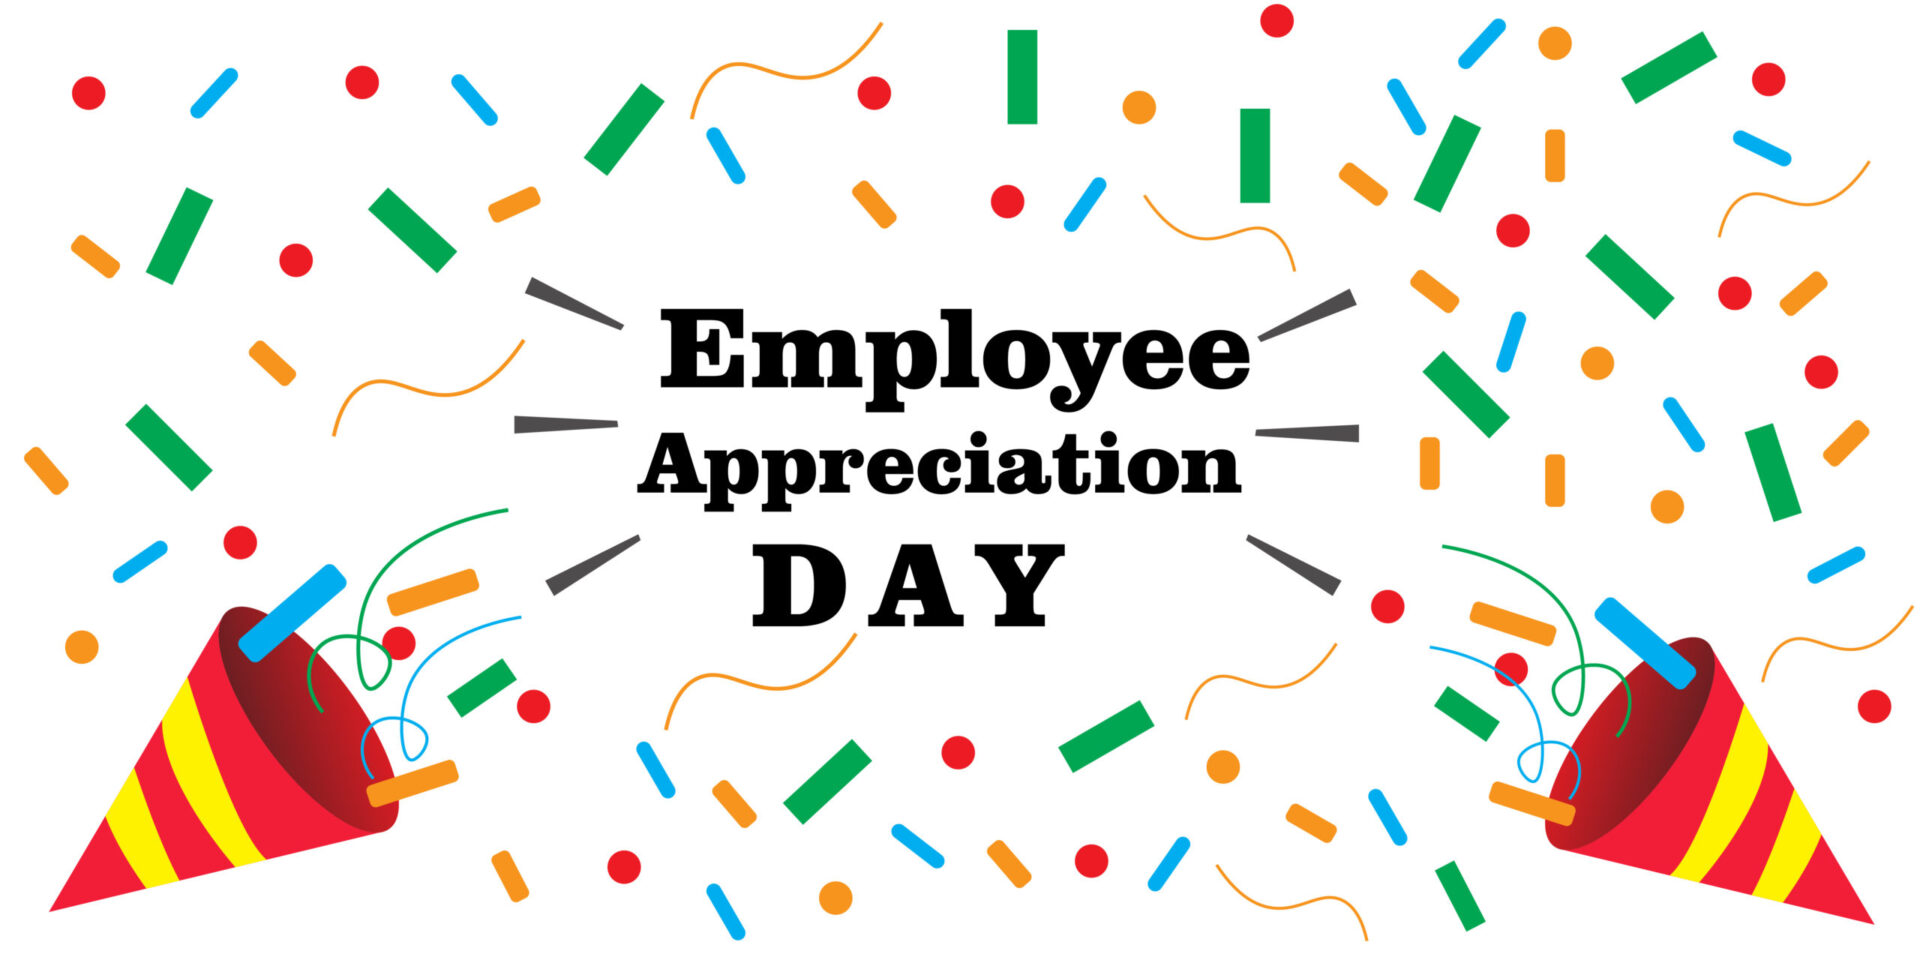 7 Fresh Ideas to Make the Most of Employee Appreciation Day